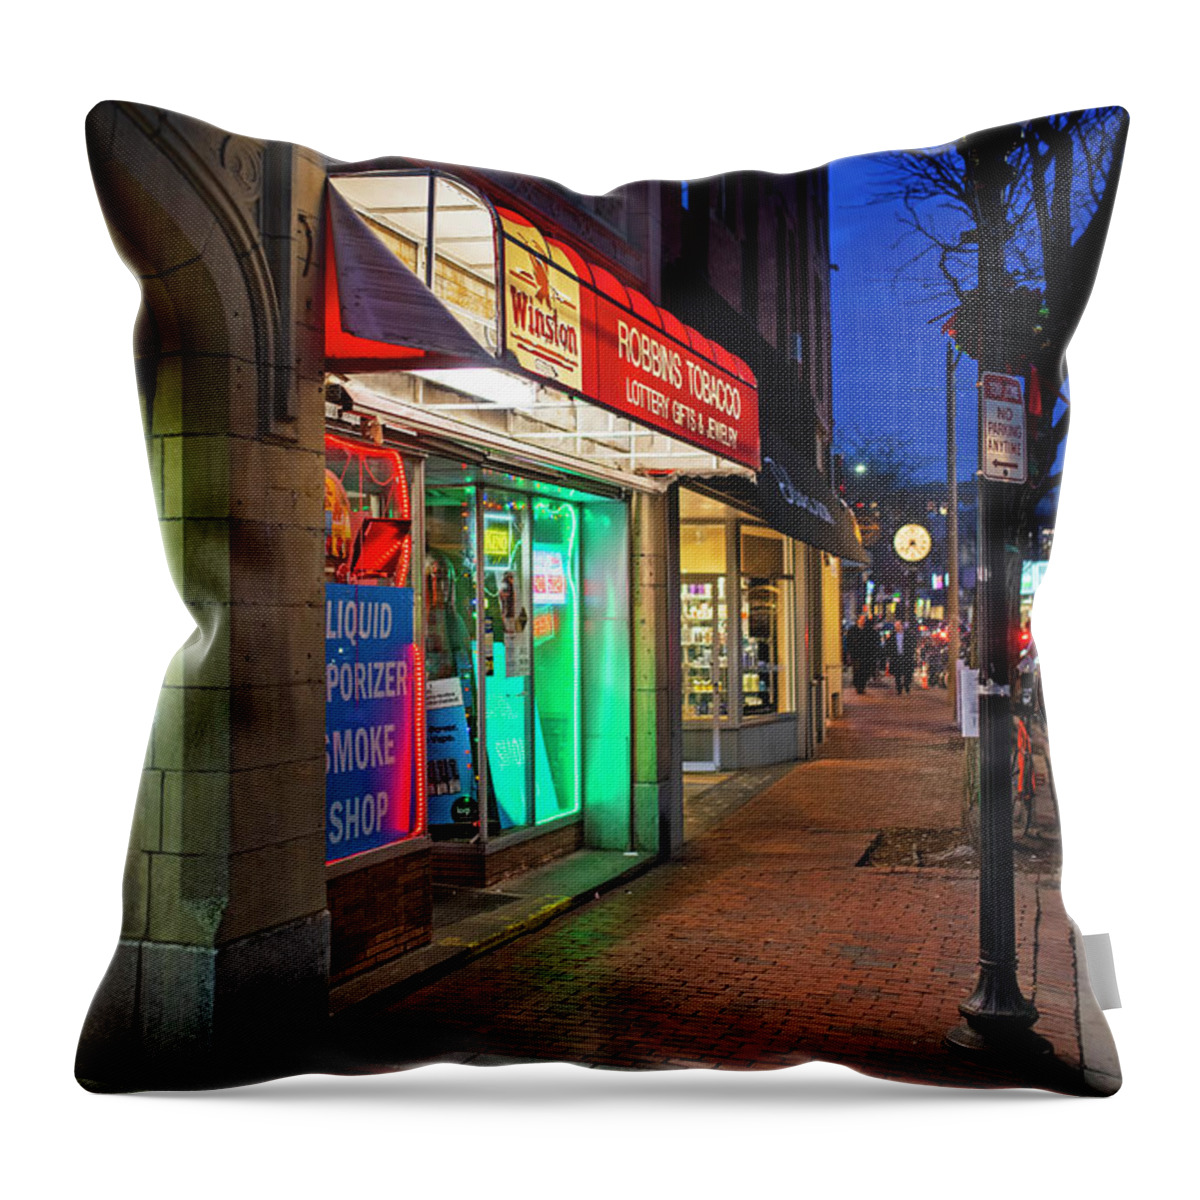 Somerville Throw Pillow featuring the photograph Somerville Massachusetts Davis Square Robbins Tobacco Elm Street by Toby McGuire